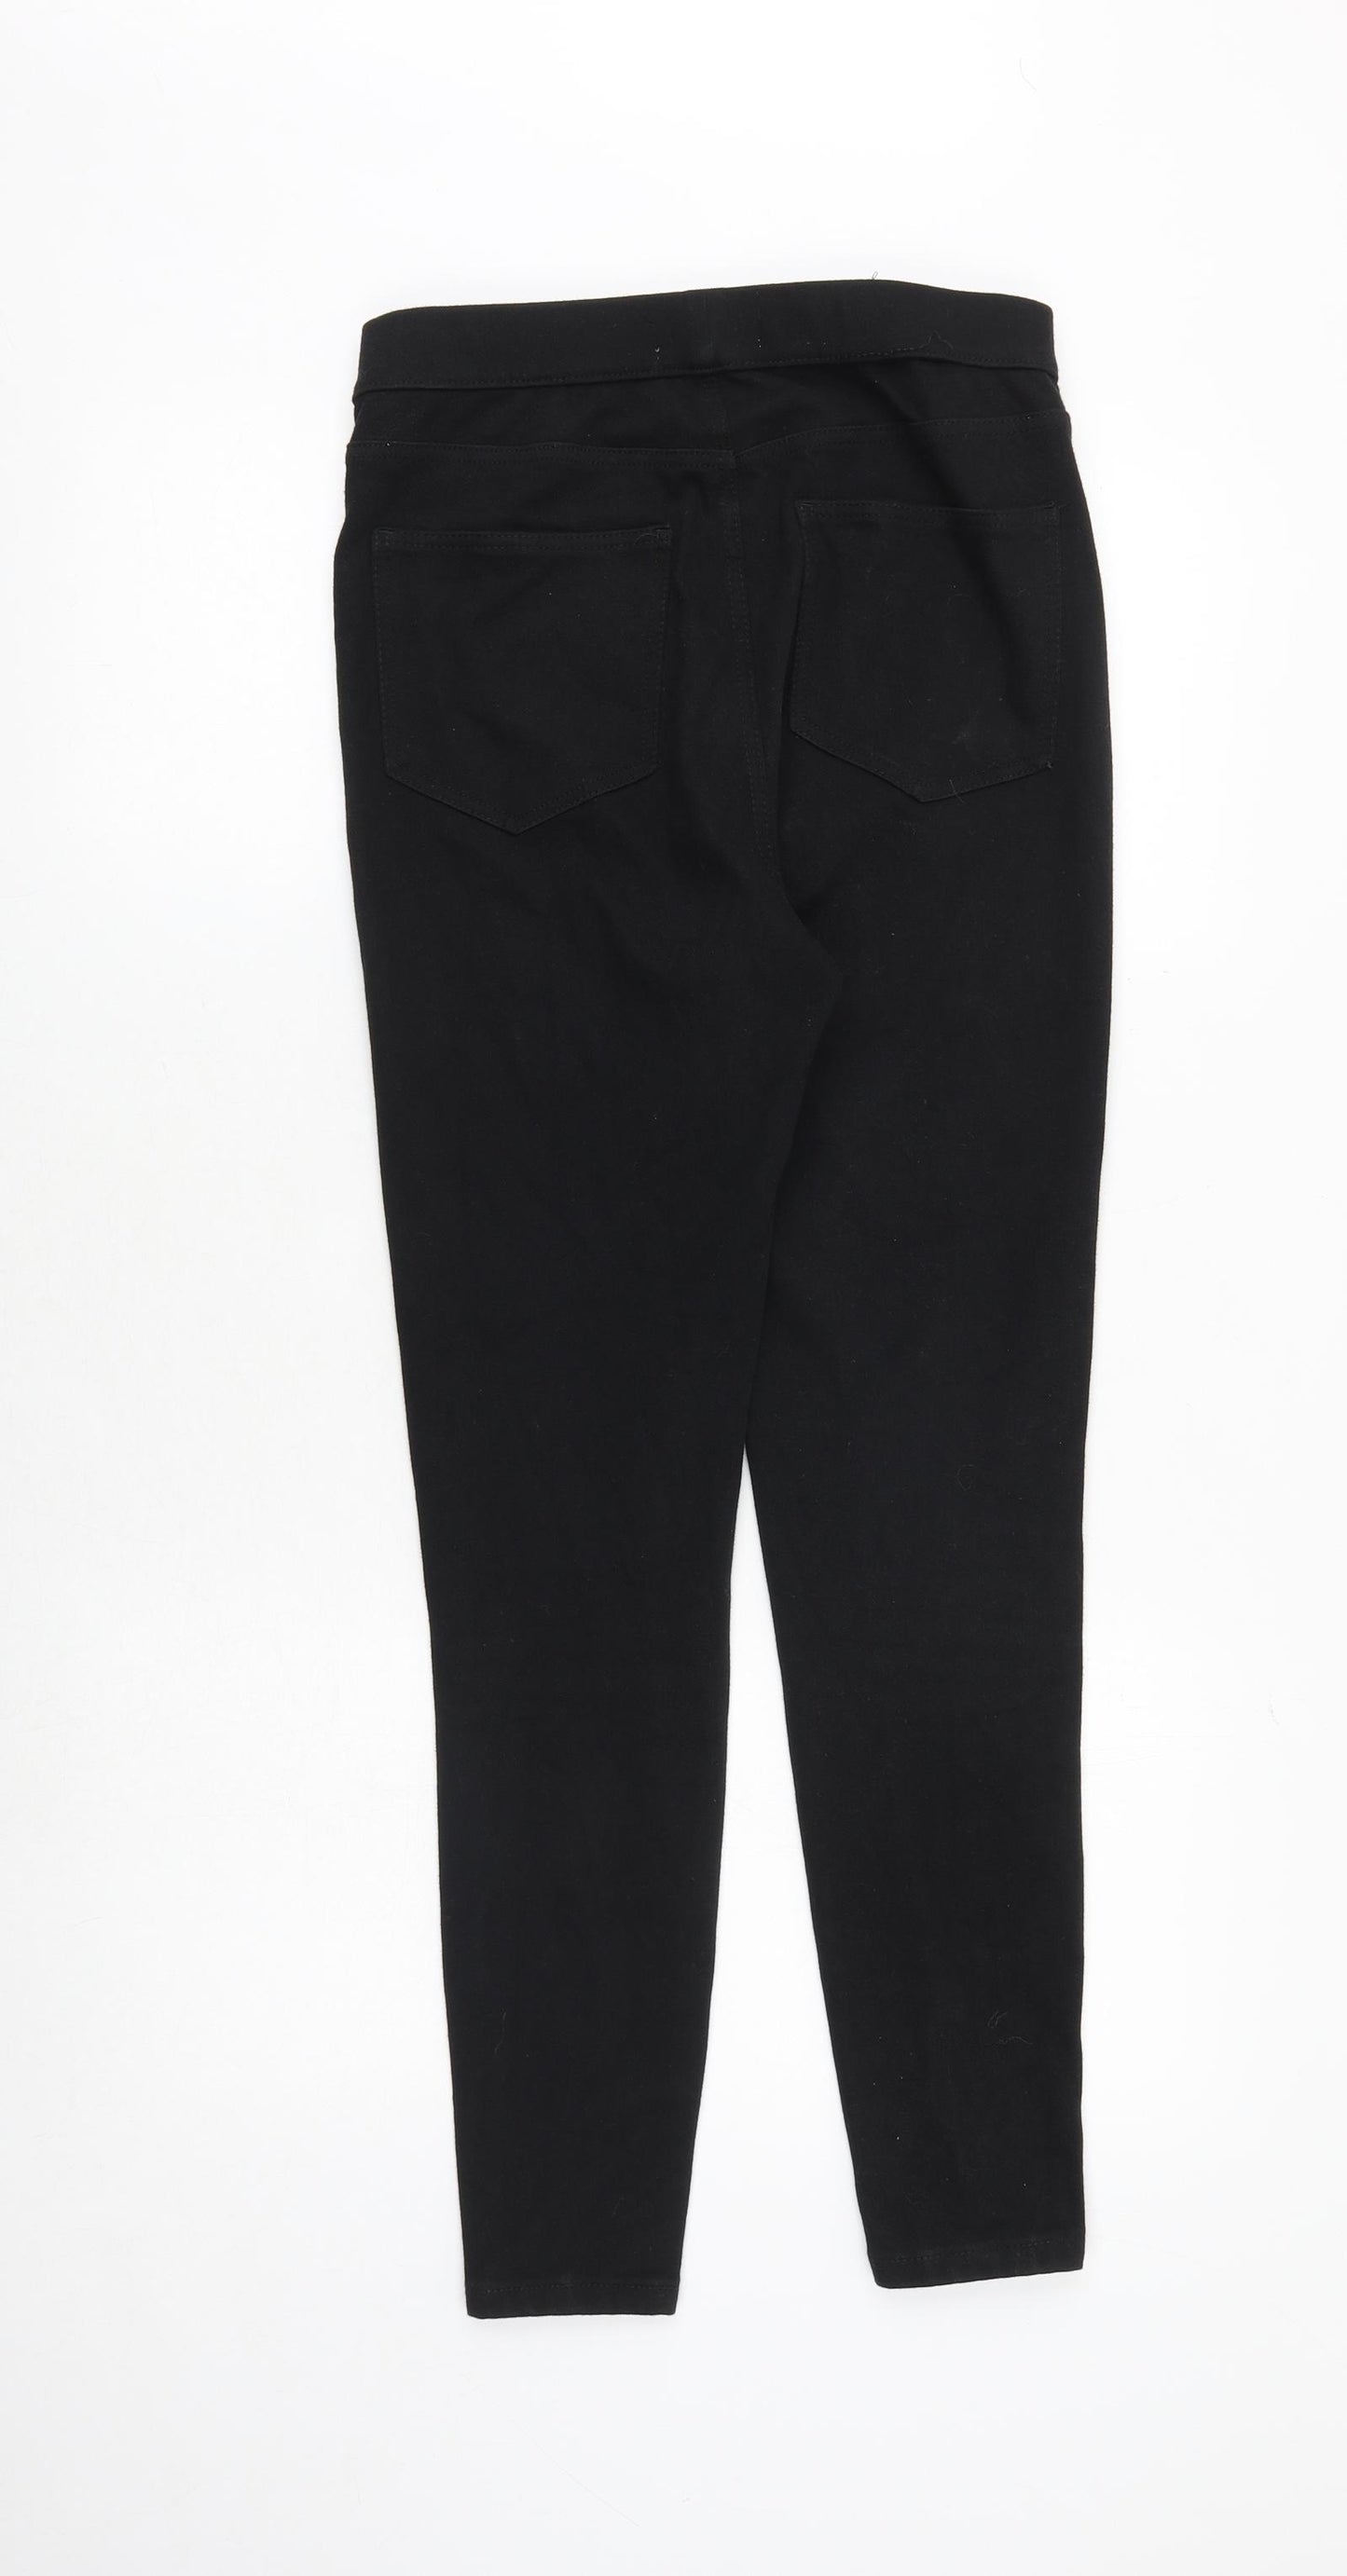 Marks and Spencer Womens Black Cotton Jegging Trousers Size 10 Regular